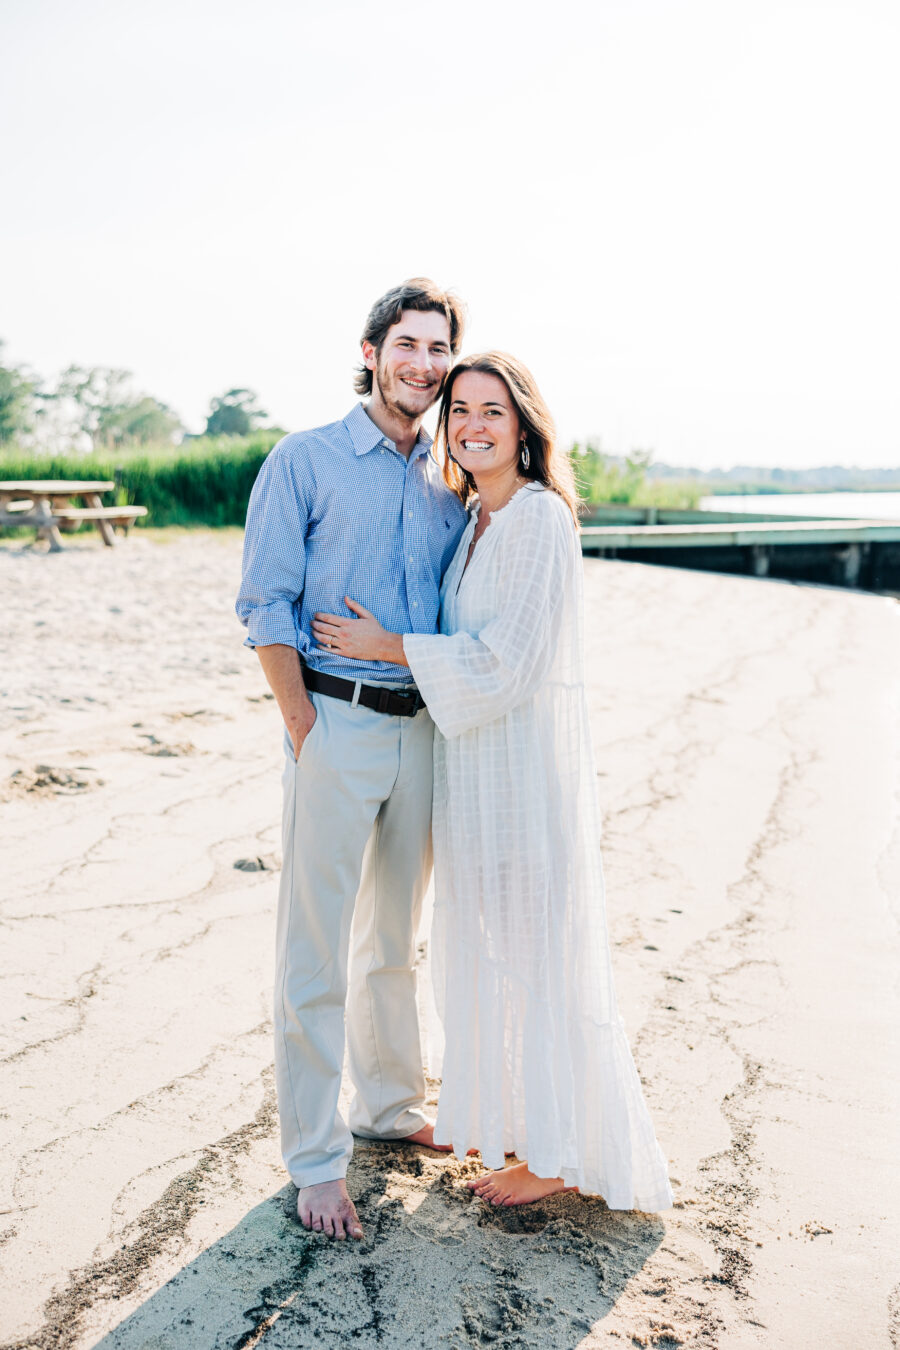 Beautiful and Timeless Love Story at Rappahannock River | Popped Blog